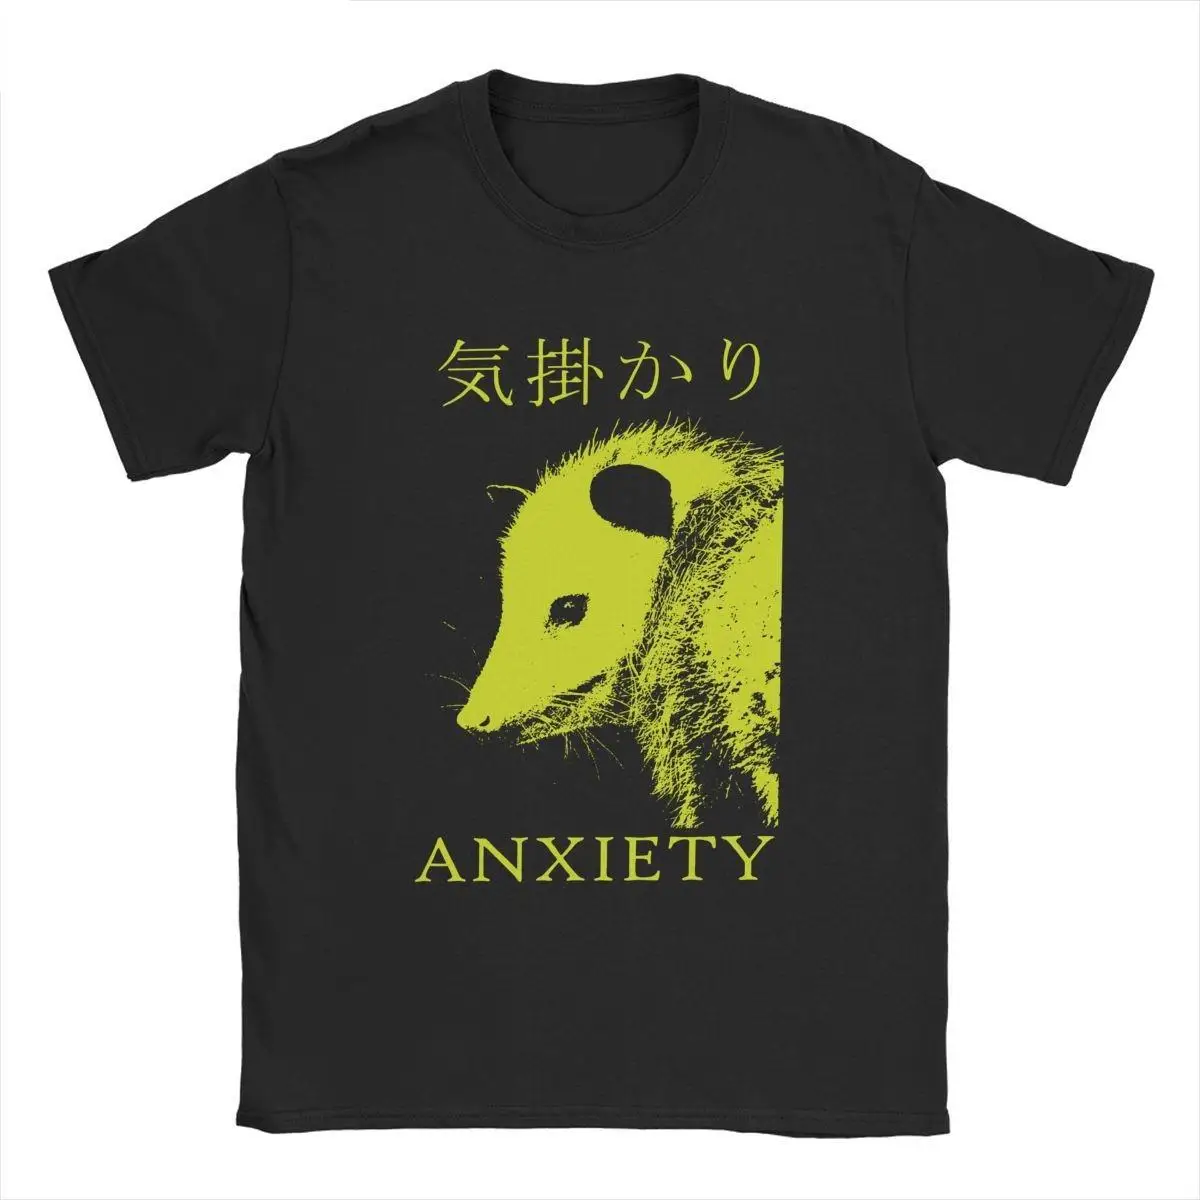 Anxiety Opossum Live Weird T-Shirts for Men Funny Vintage Cotton Tee Shirt Crew Neck Short Sleeve T Shirts Graphic Clothing